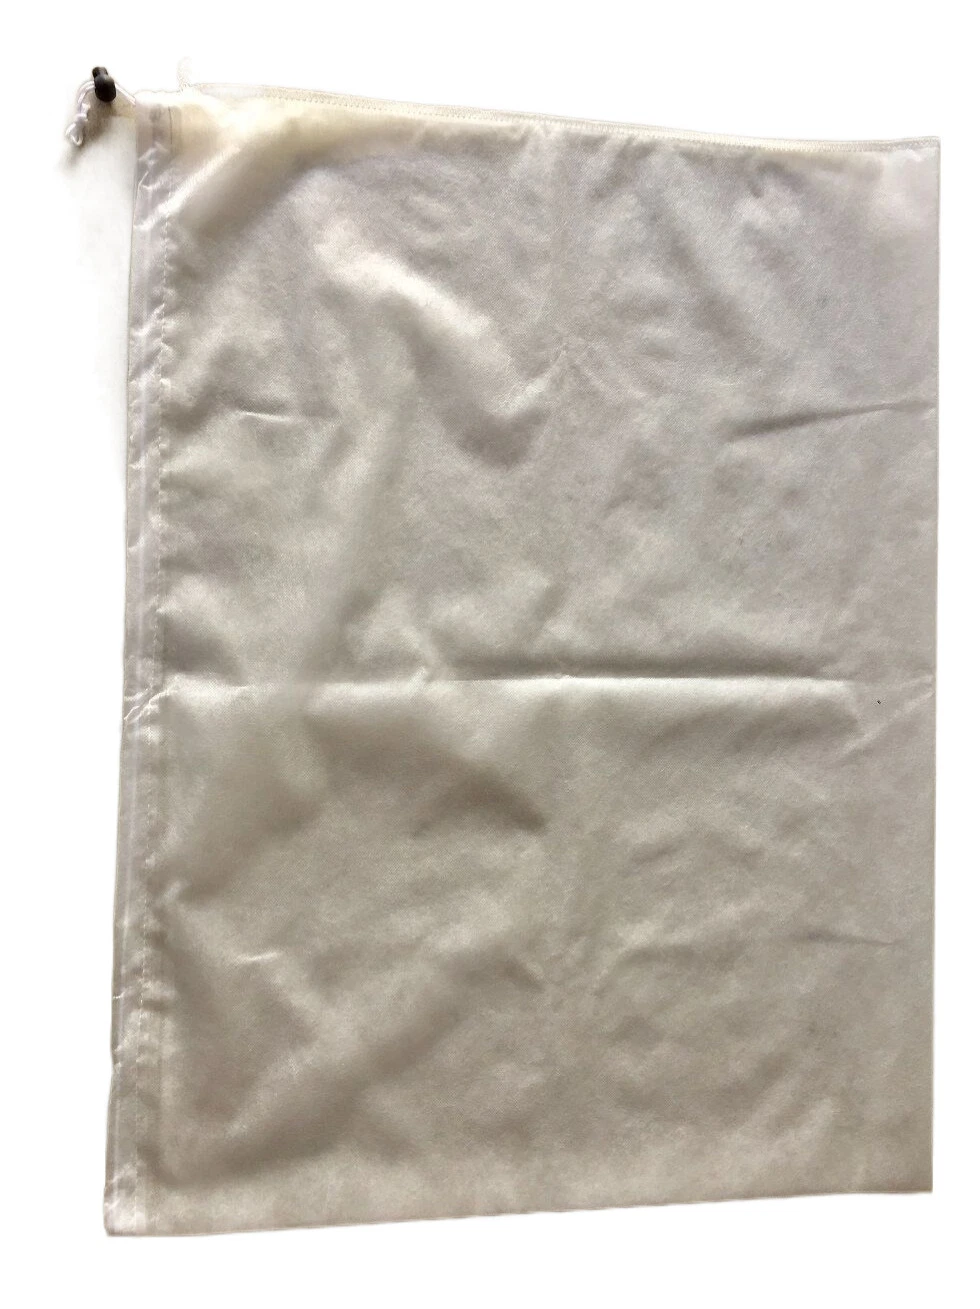 Winter Warming Jacket Anti Shrink Cover Bag Anti Frost Nonwoven Cover